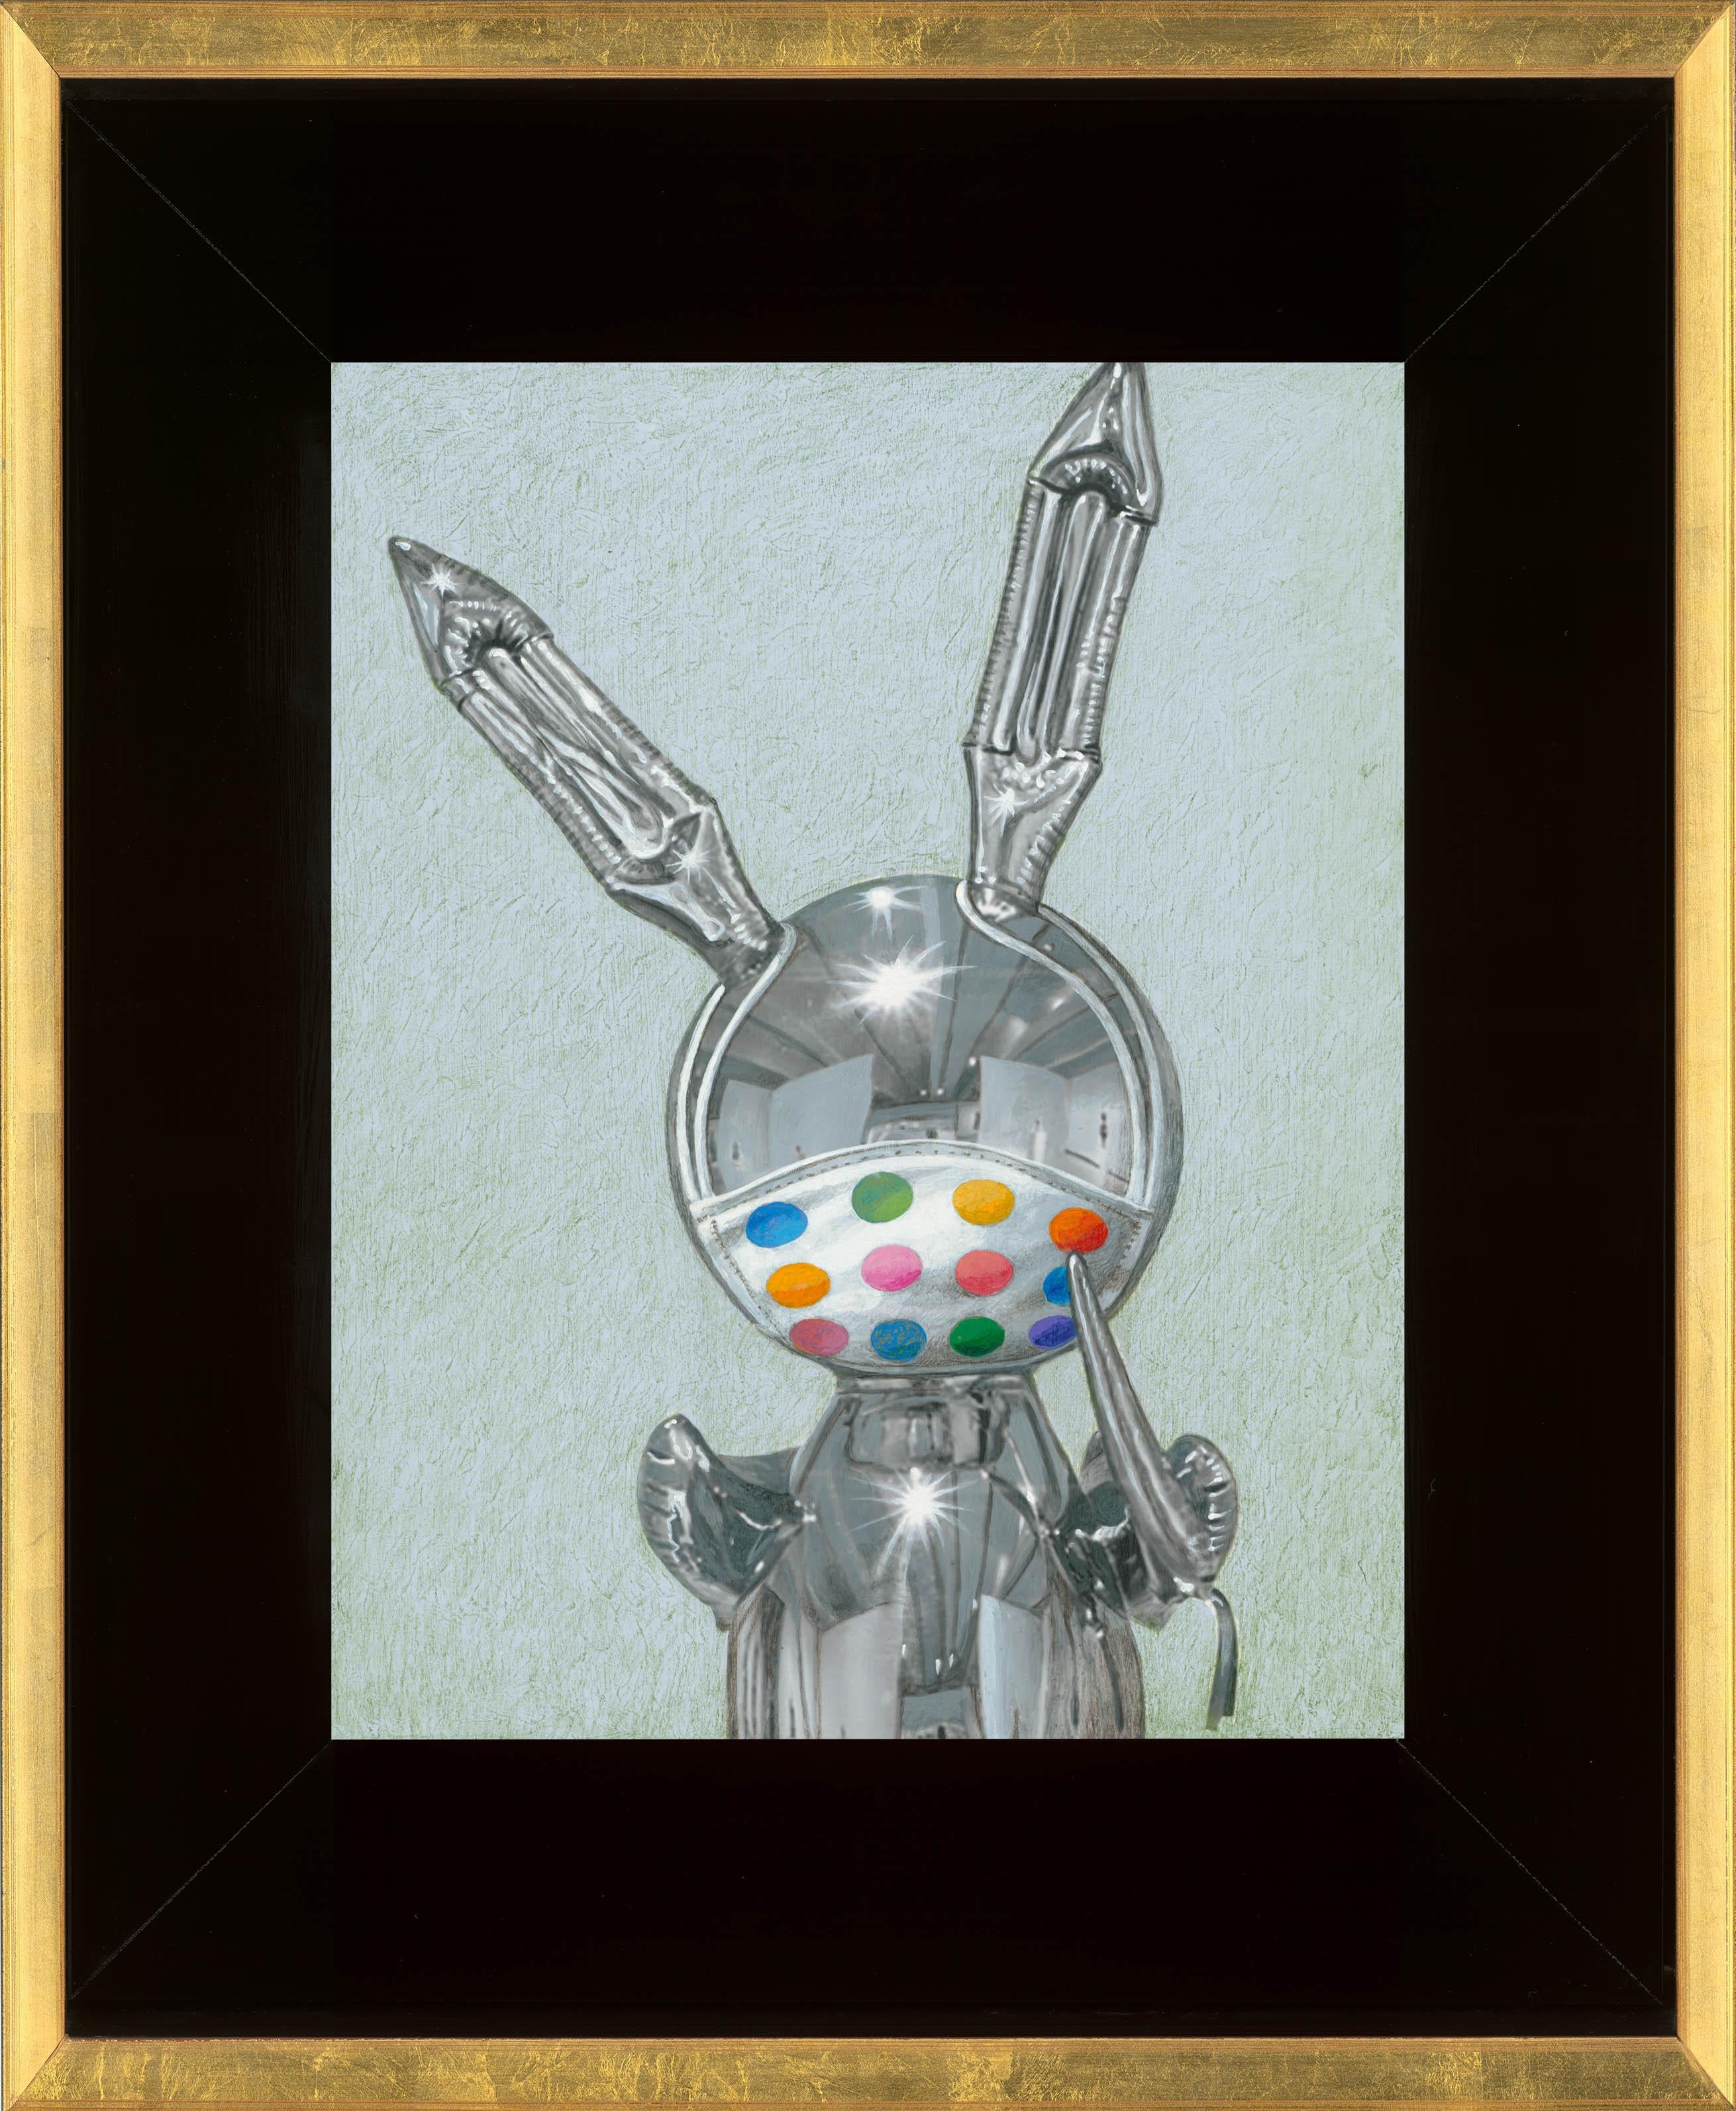 Jeff Koons “Rabbit” masked with Damian Hirst’s “Dots”, 2020 & Unmasked - Painting by Clement Kamena